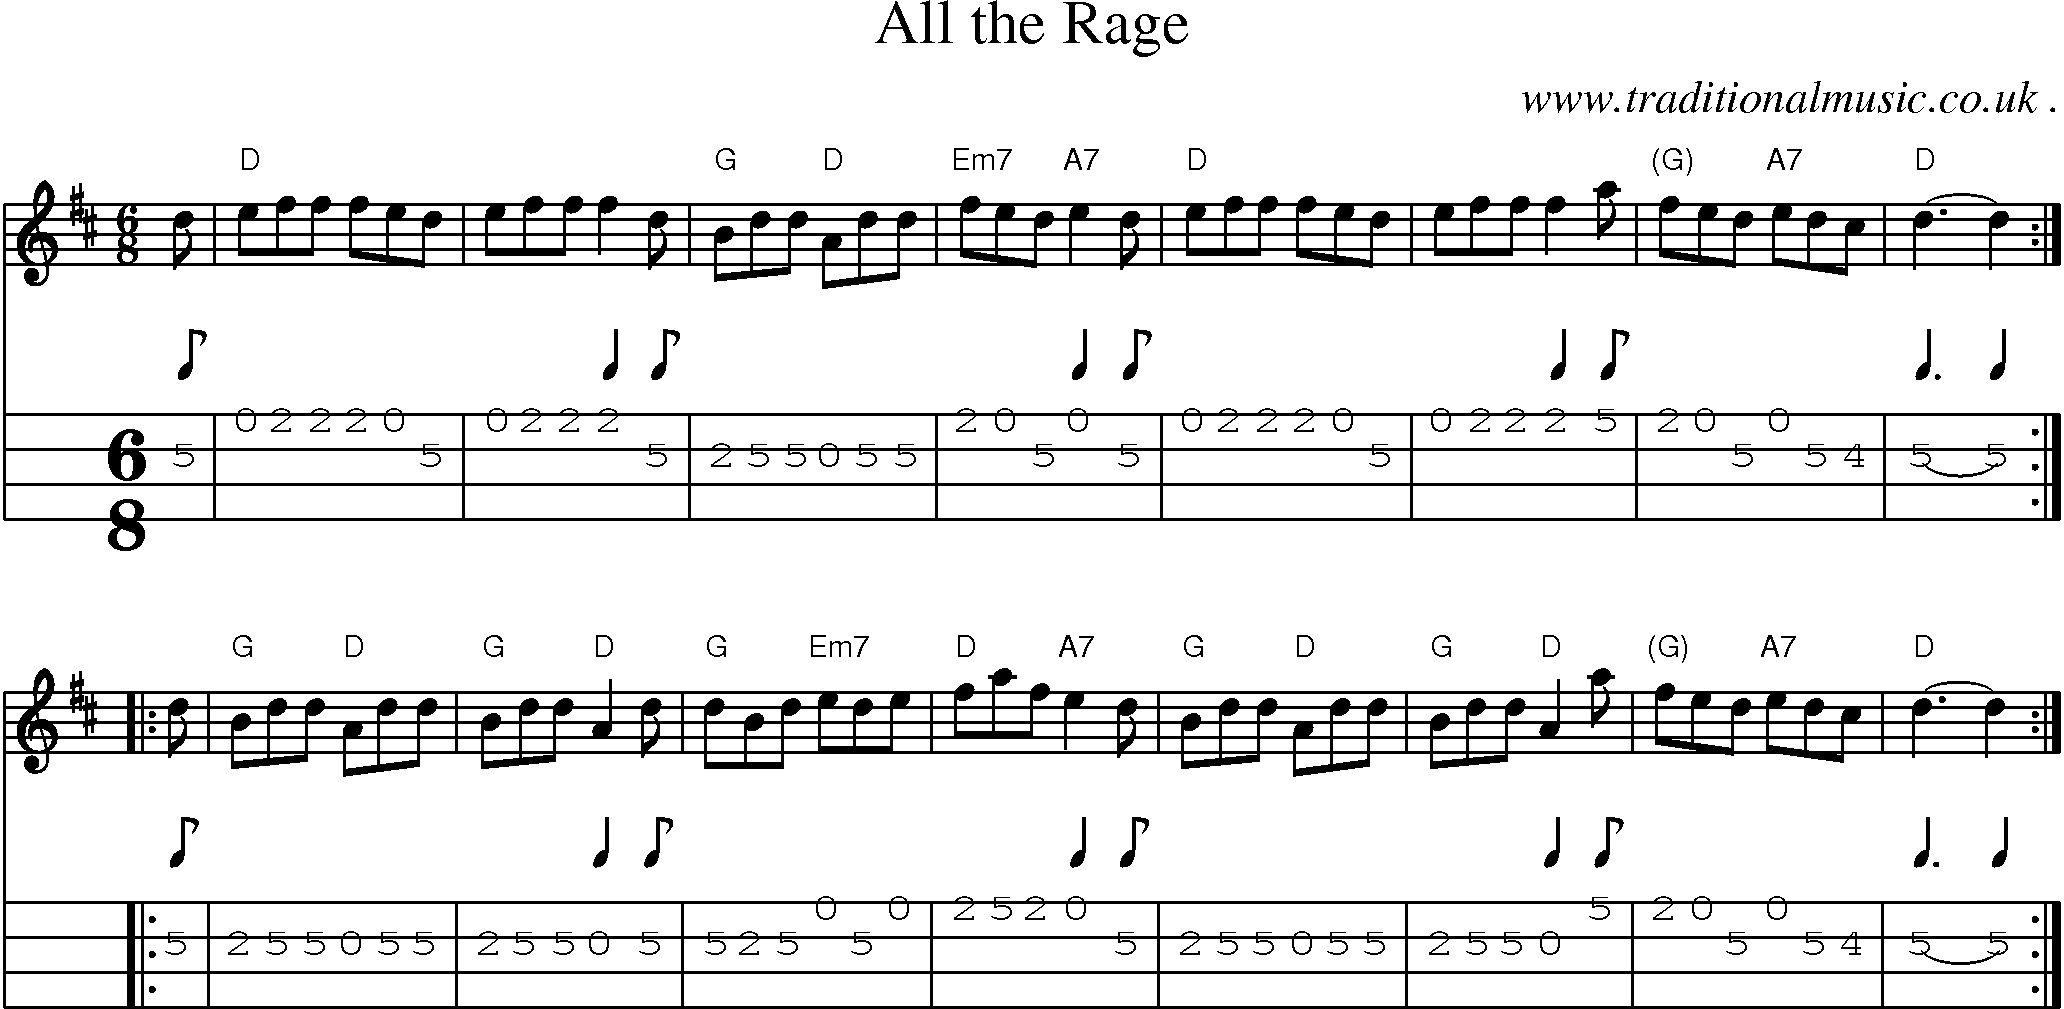 Sheet-music  score, Chords and Mandolin Tabs for All The Rage